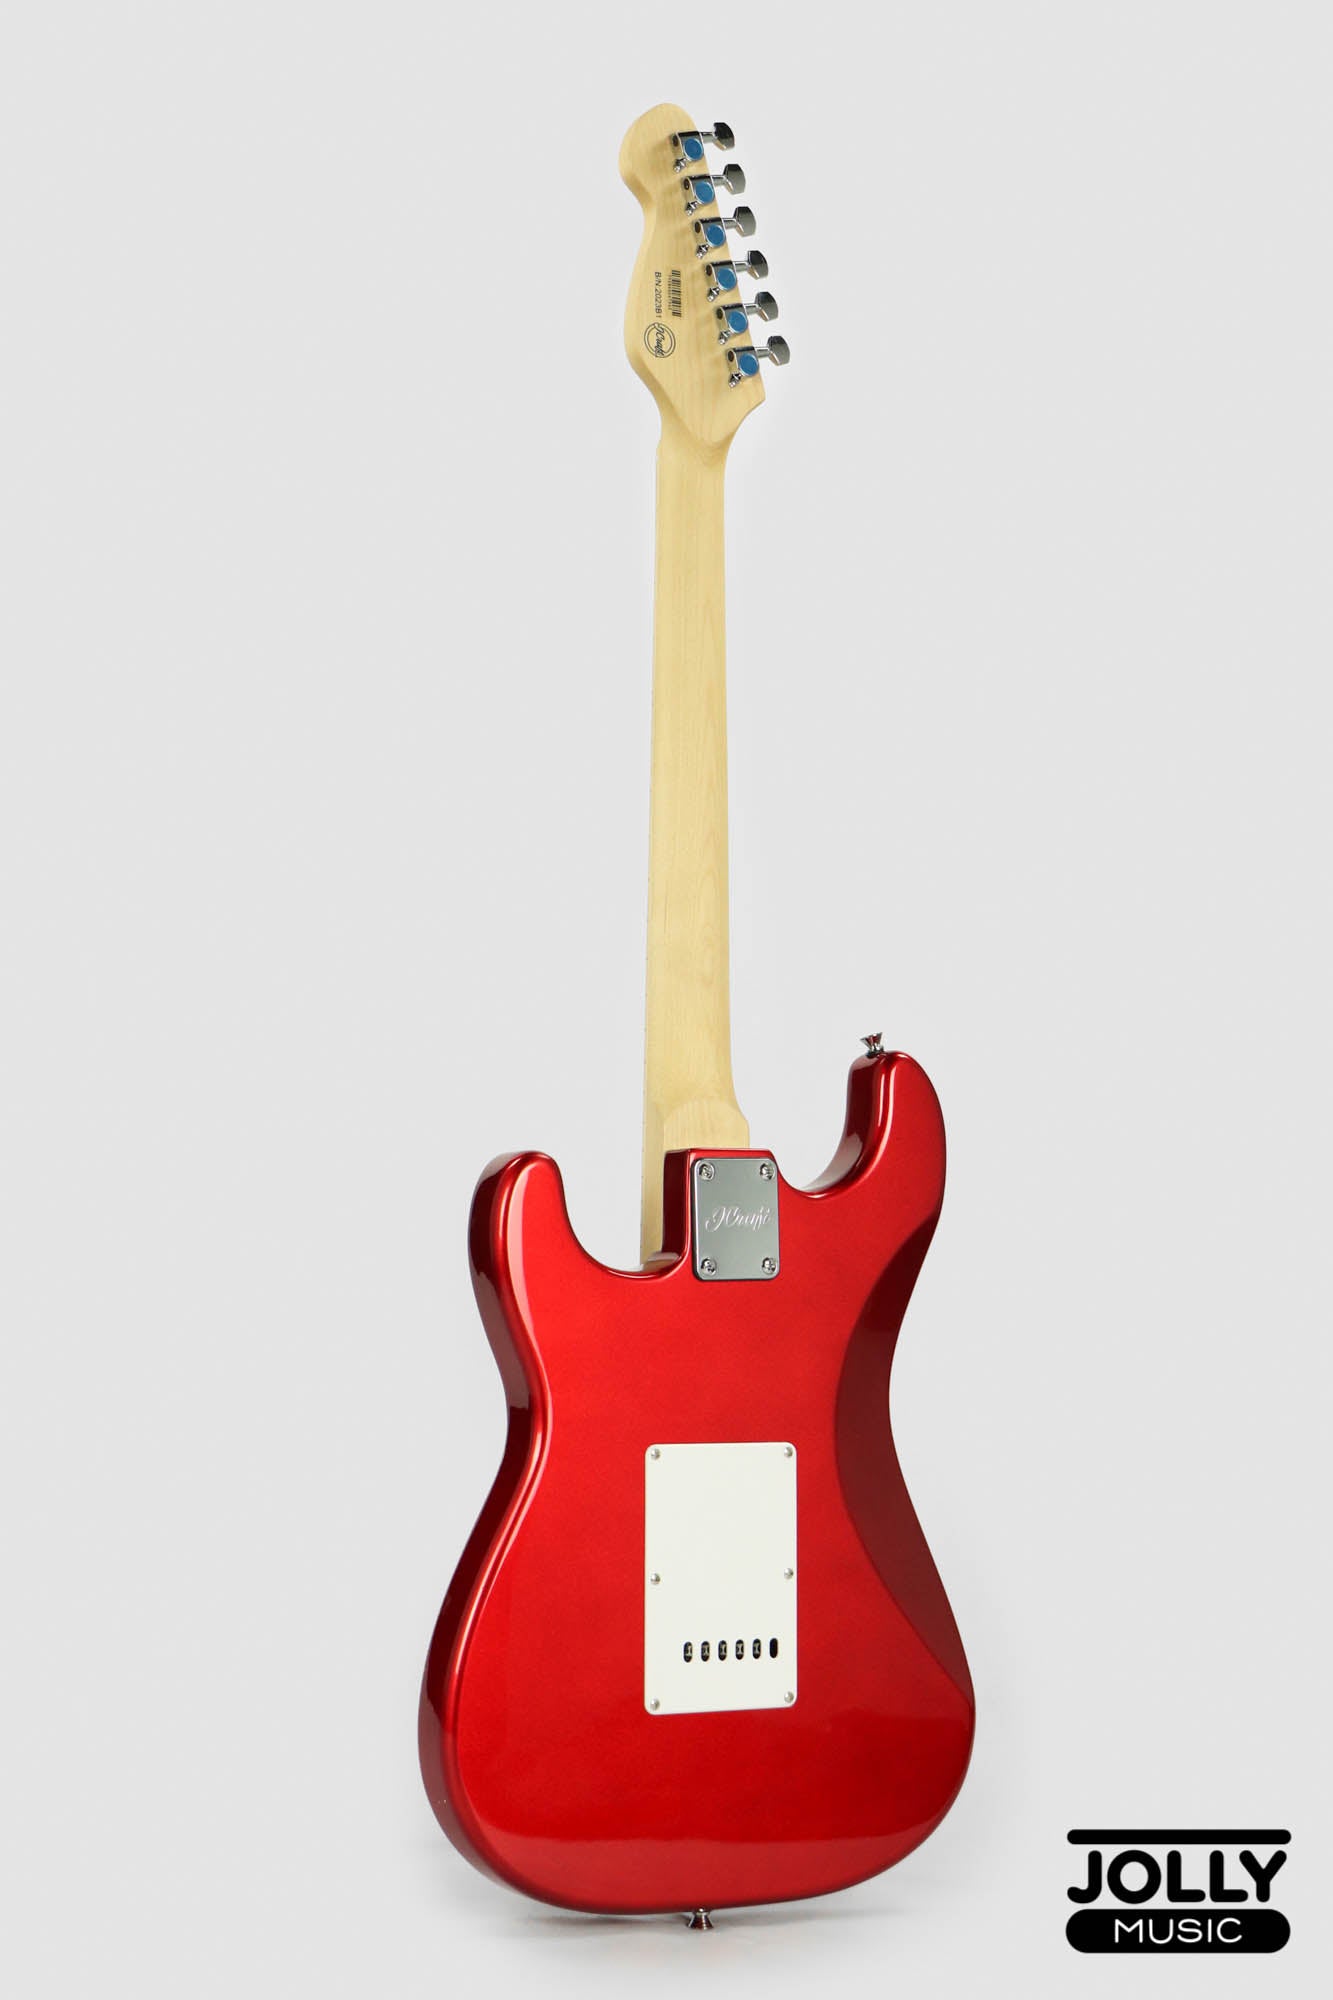 JCraft S-1 S-Style Electric Guitar with Gigbag - Metallic Red